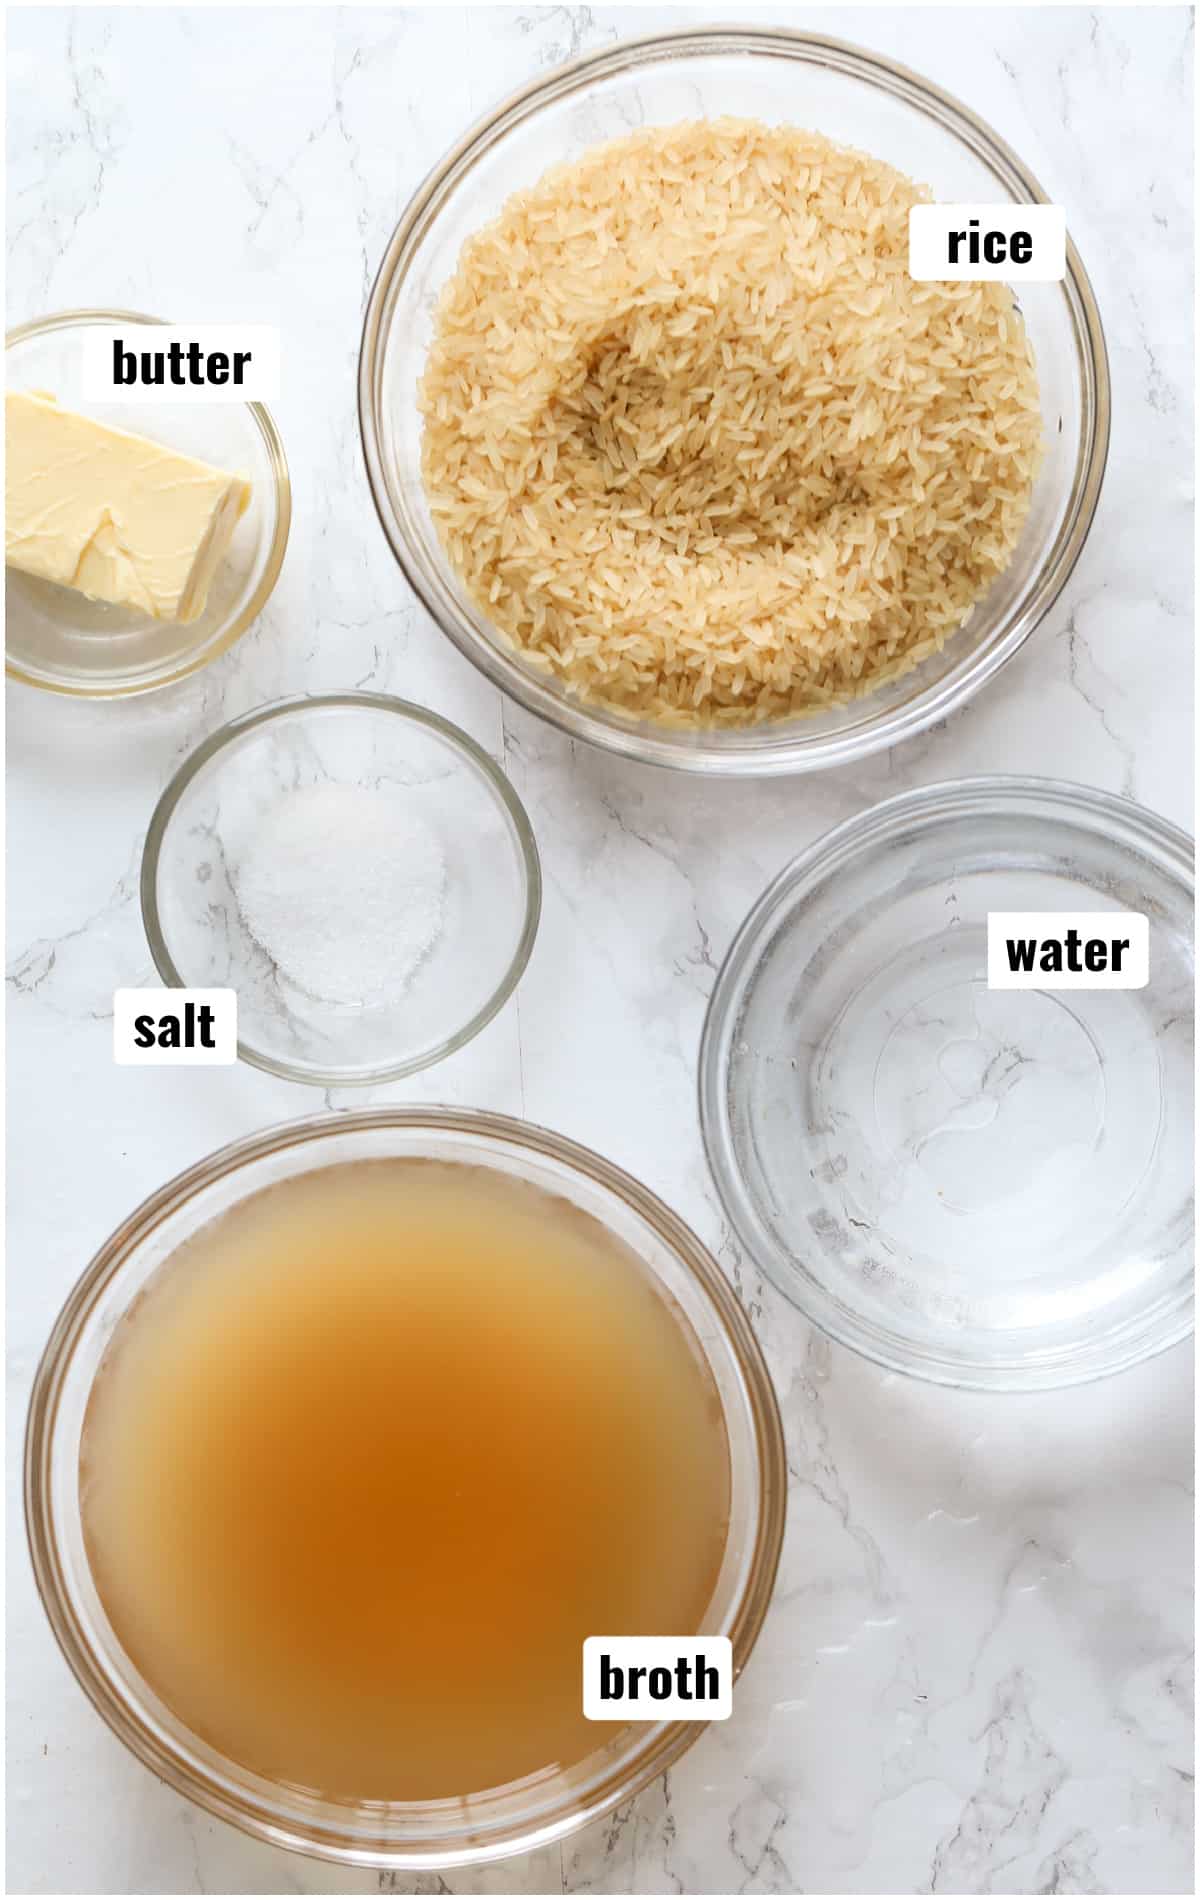 An image displaying all the ingredients for white rice.